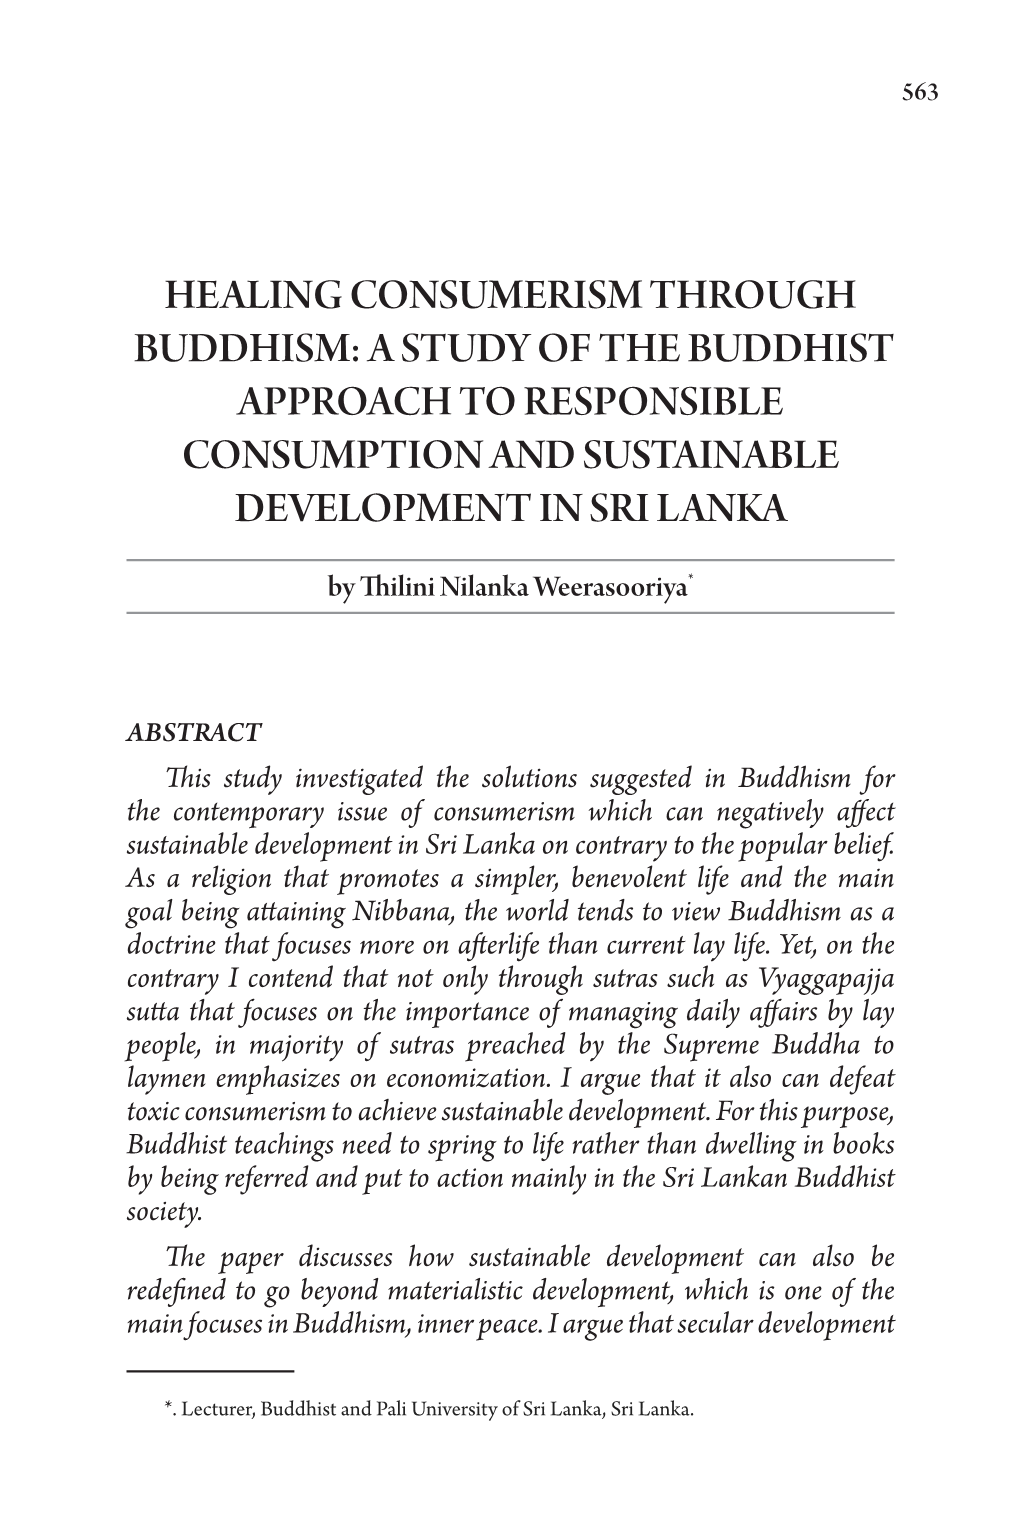 Healing Consumerism Through Buddhism: a Study of the Buddhist Approach to Responsible Consumption and Sustainable Development in Sri Lanka